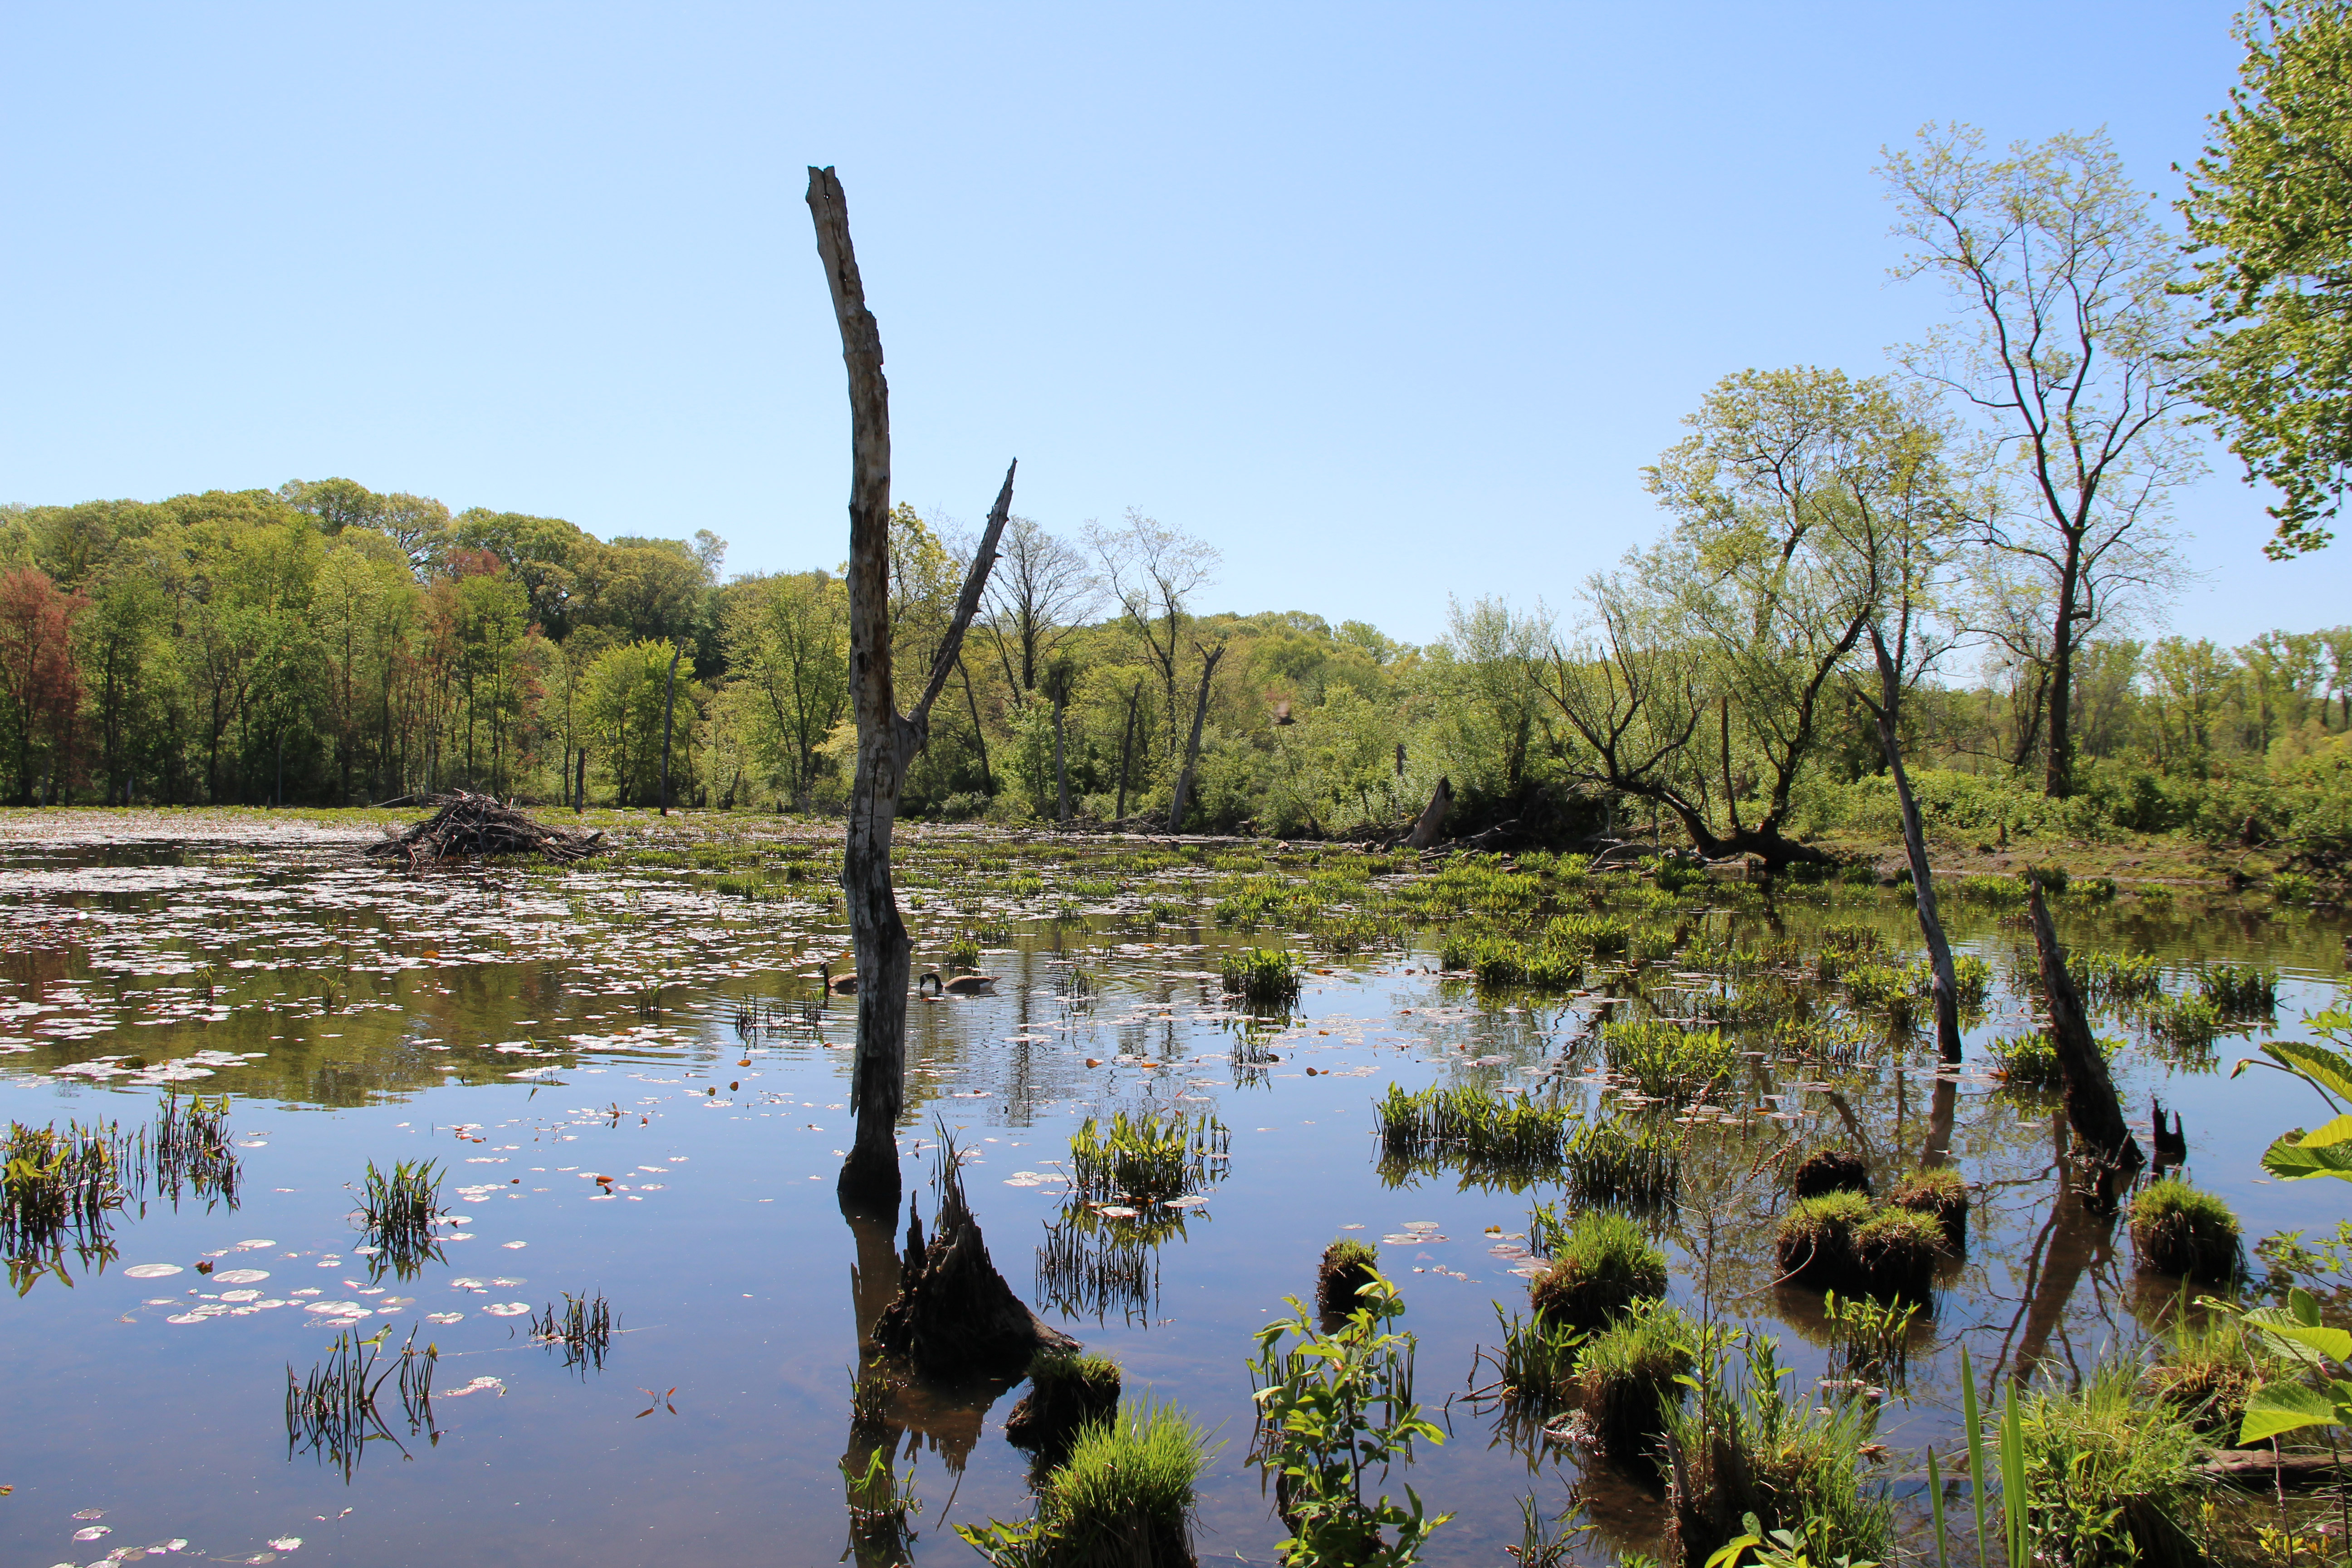 A wetland area with trees and blue skies behind it.